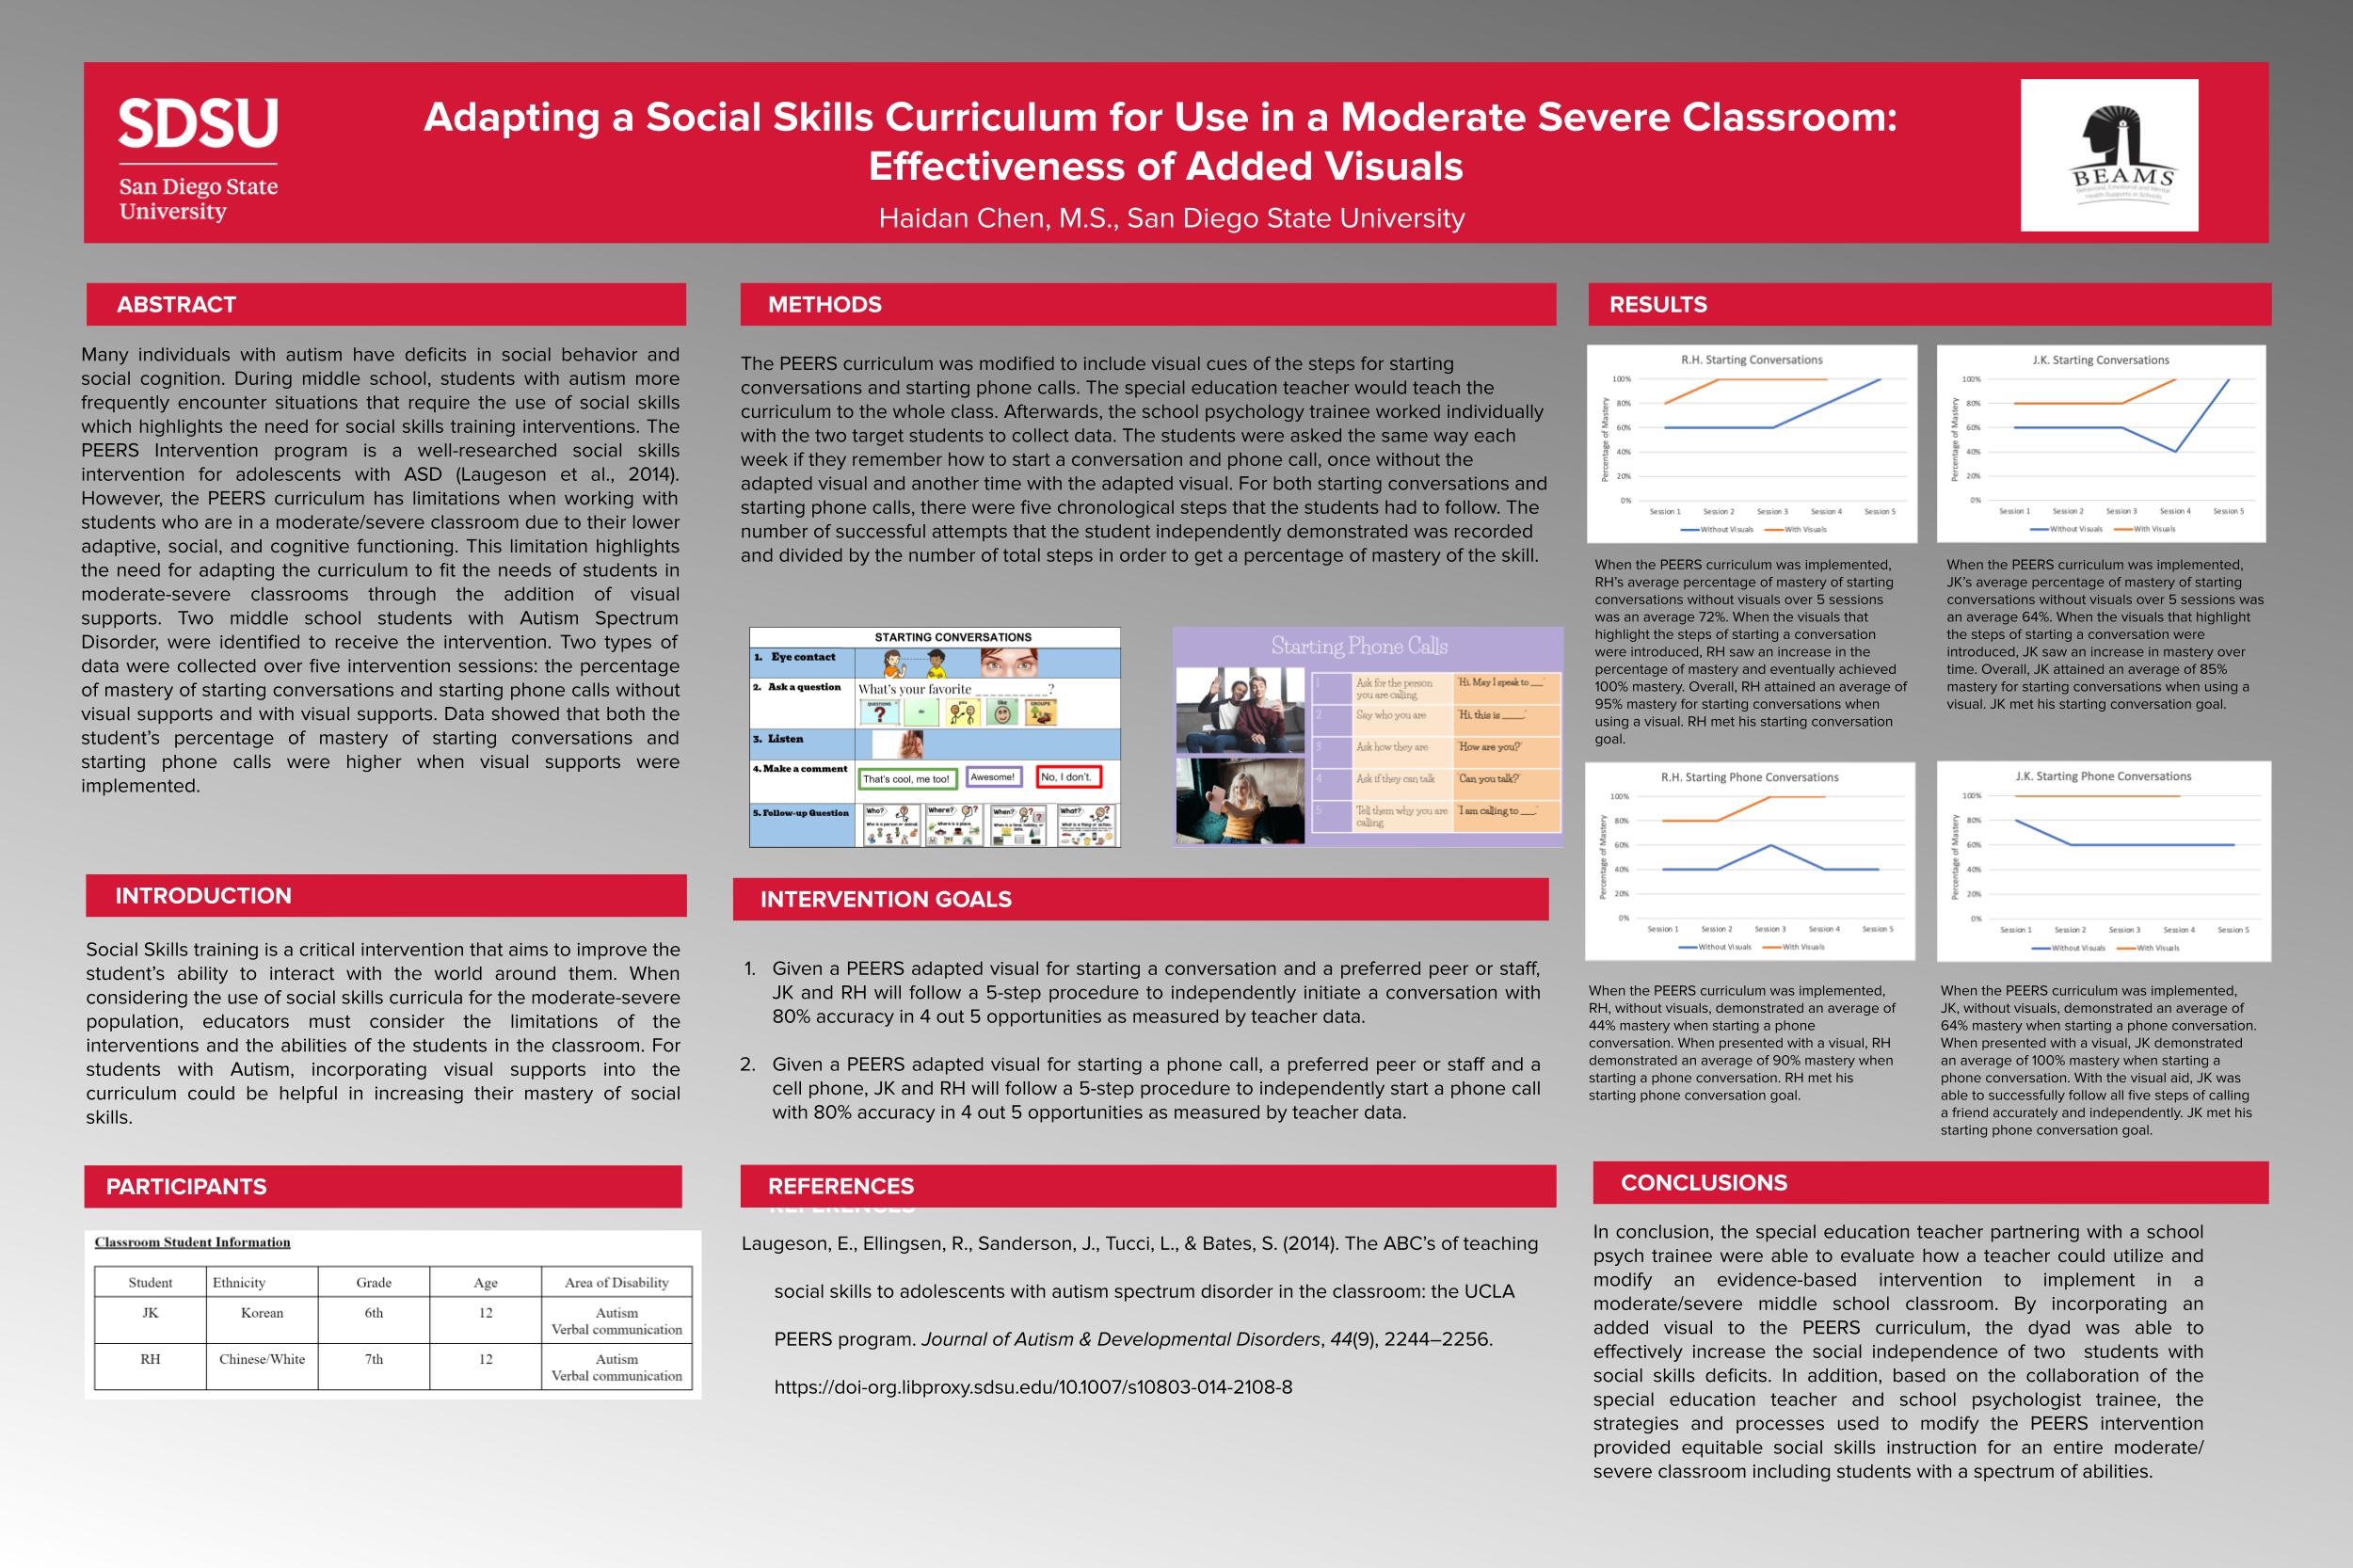 Adapting Social Skills Curriculum for Use in a Moderate Severe Classroom: Effectiveness of Added Visuals